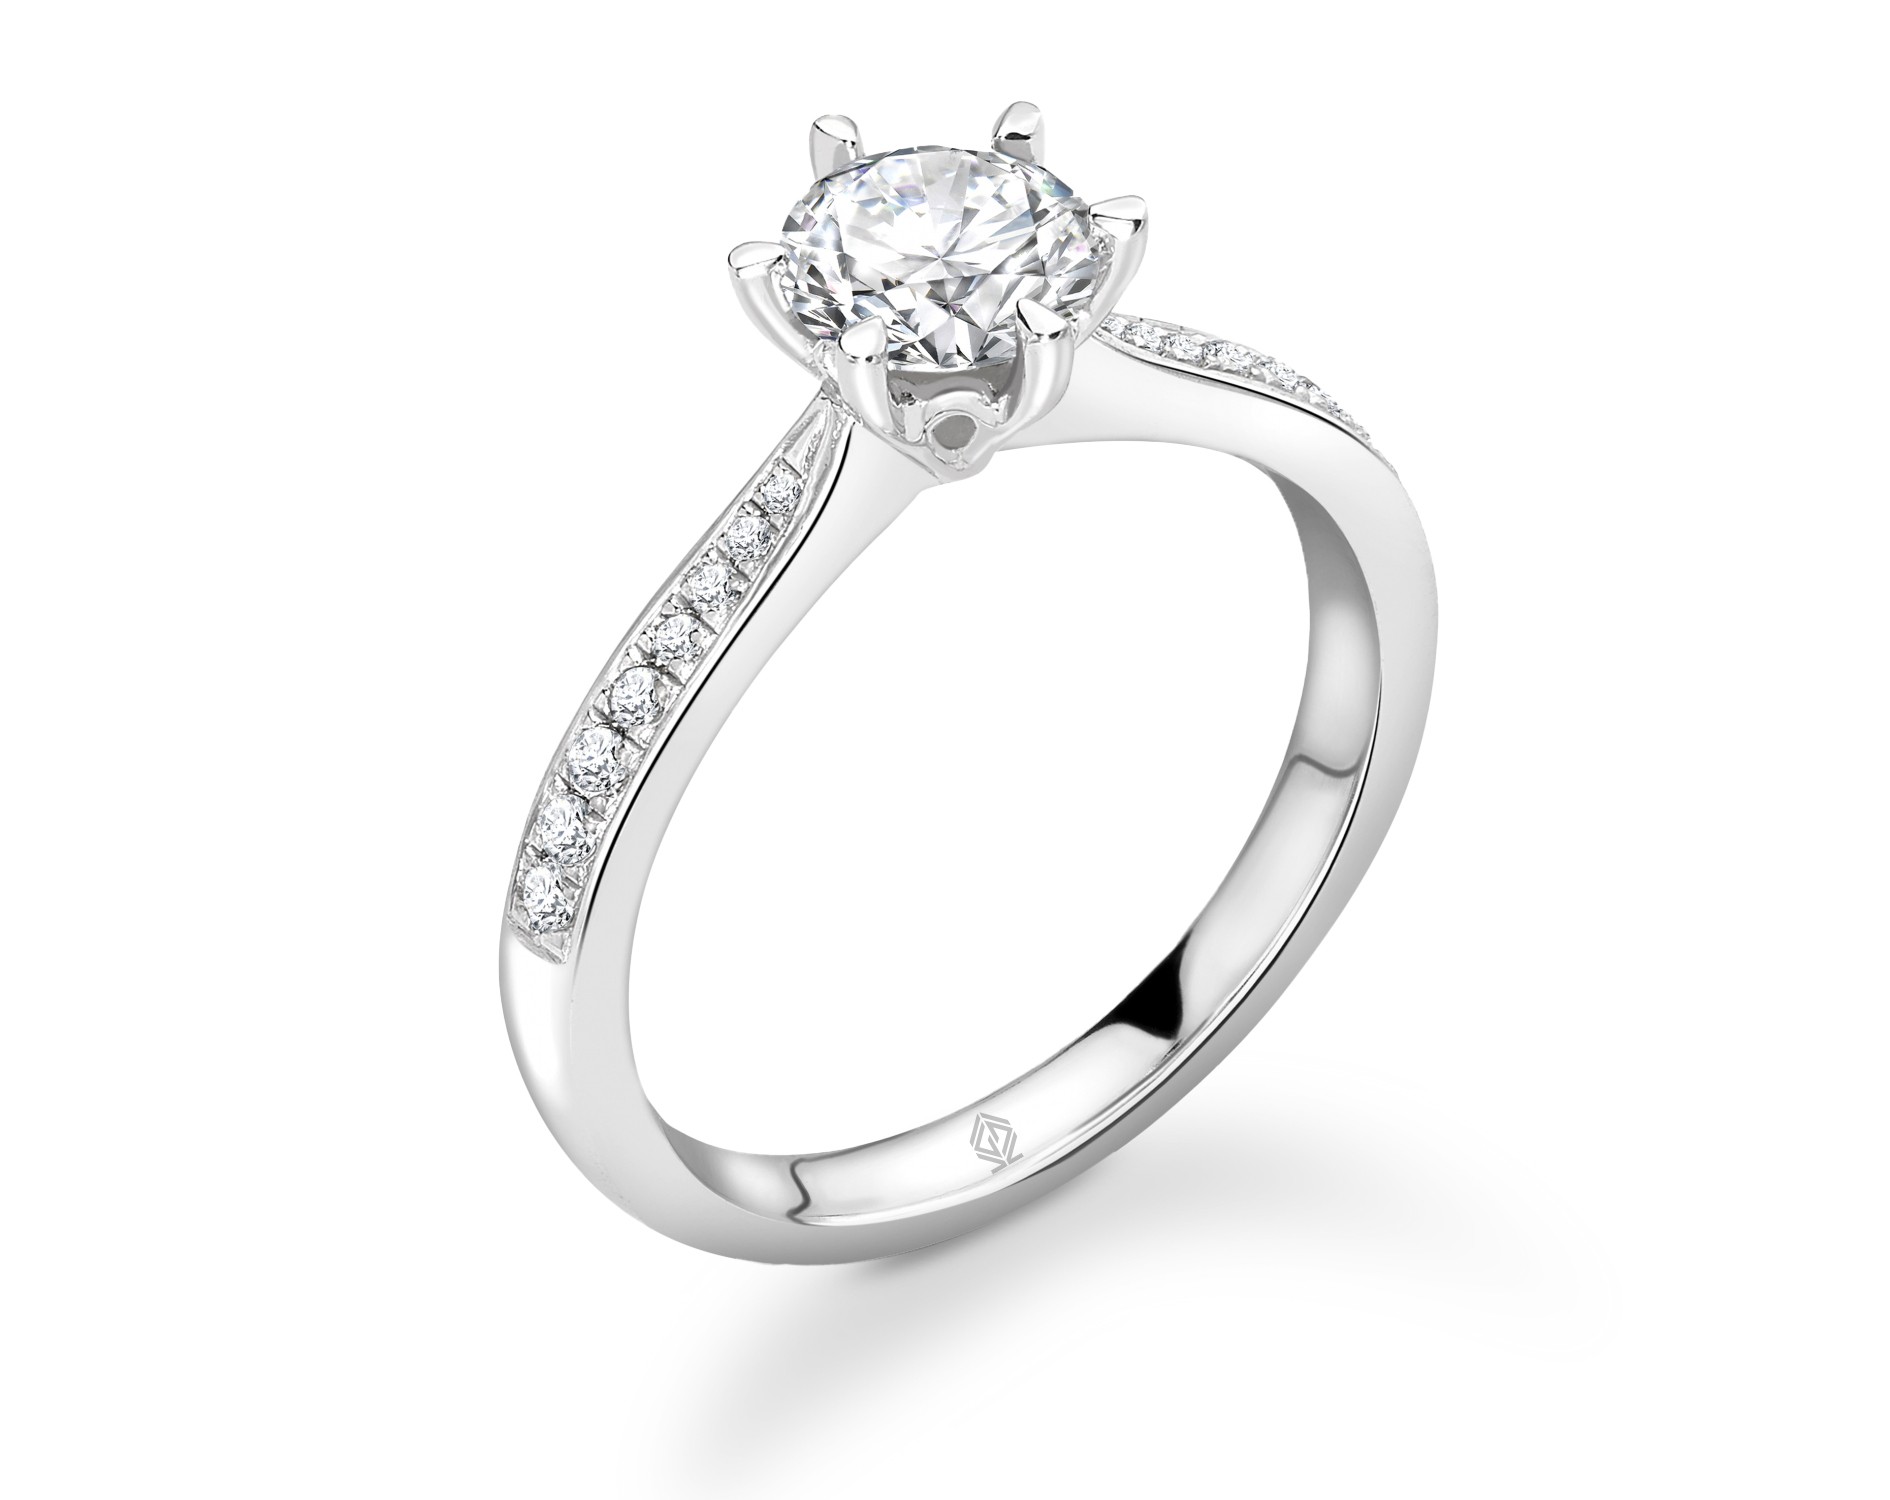 18K WHITE GOLD ROUND CUT 6 PRONGS DIAMOND ENGAGEMENT RING WITH CHANNEL SET SIDE STONES